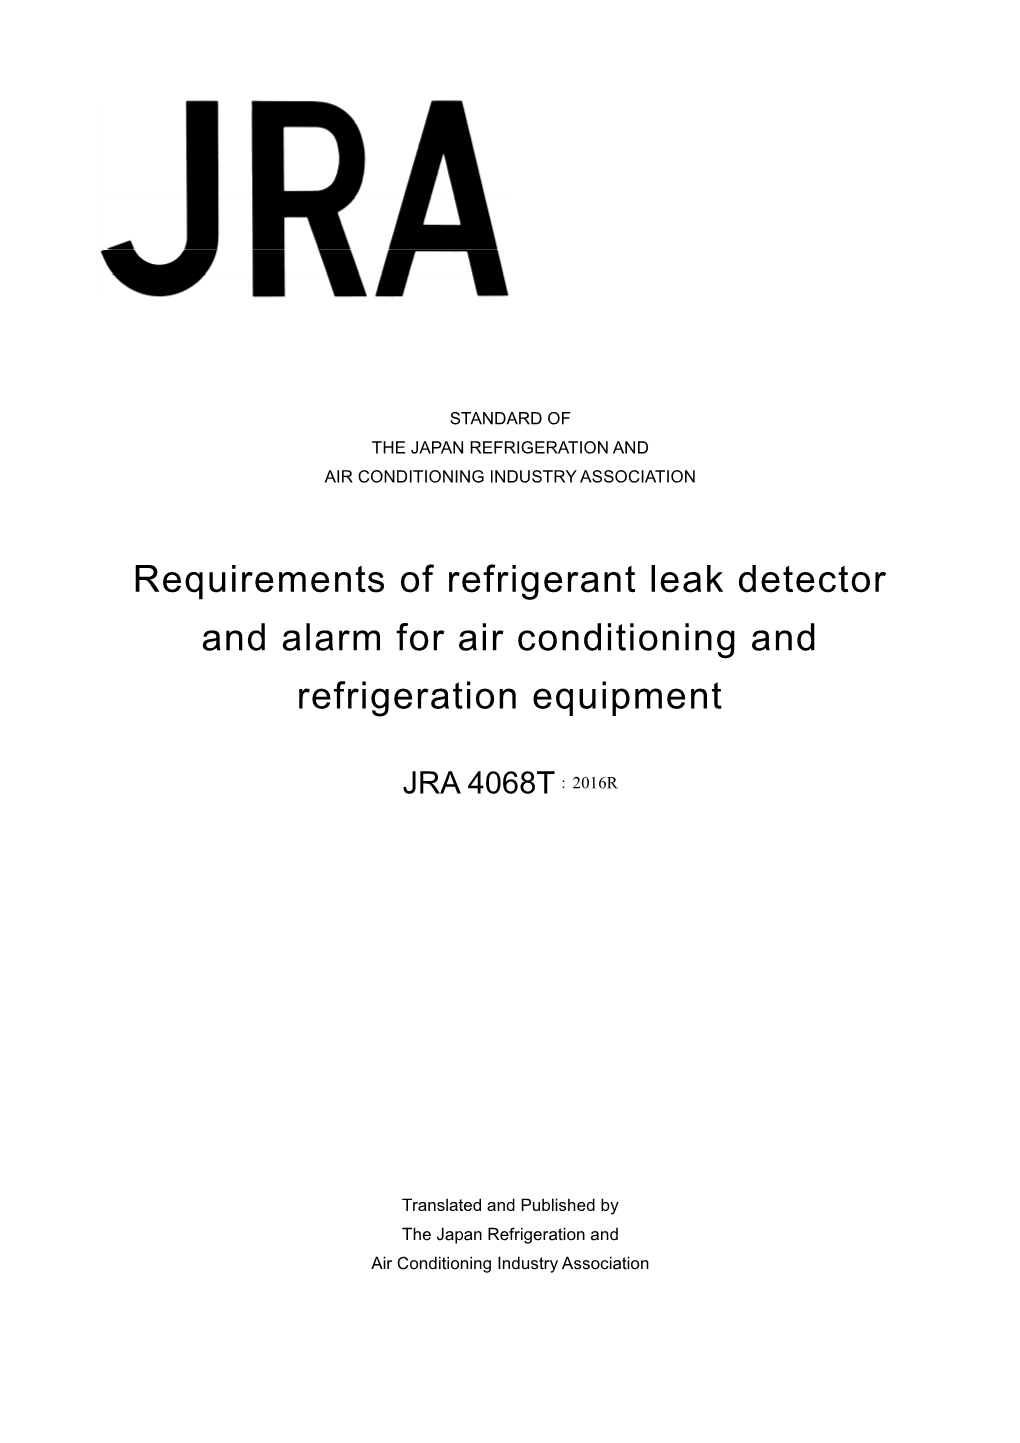 Requirements of Refrigerant Leak Detector and Alarm for Air Conditioning and Refrigeration Equipment